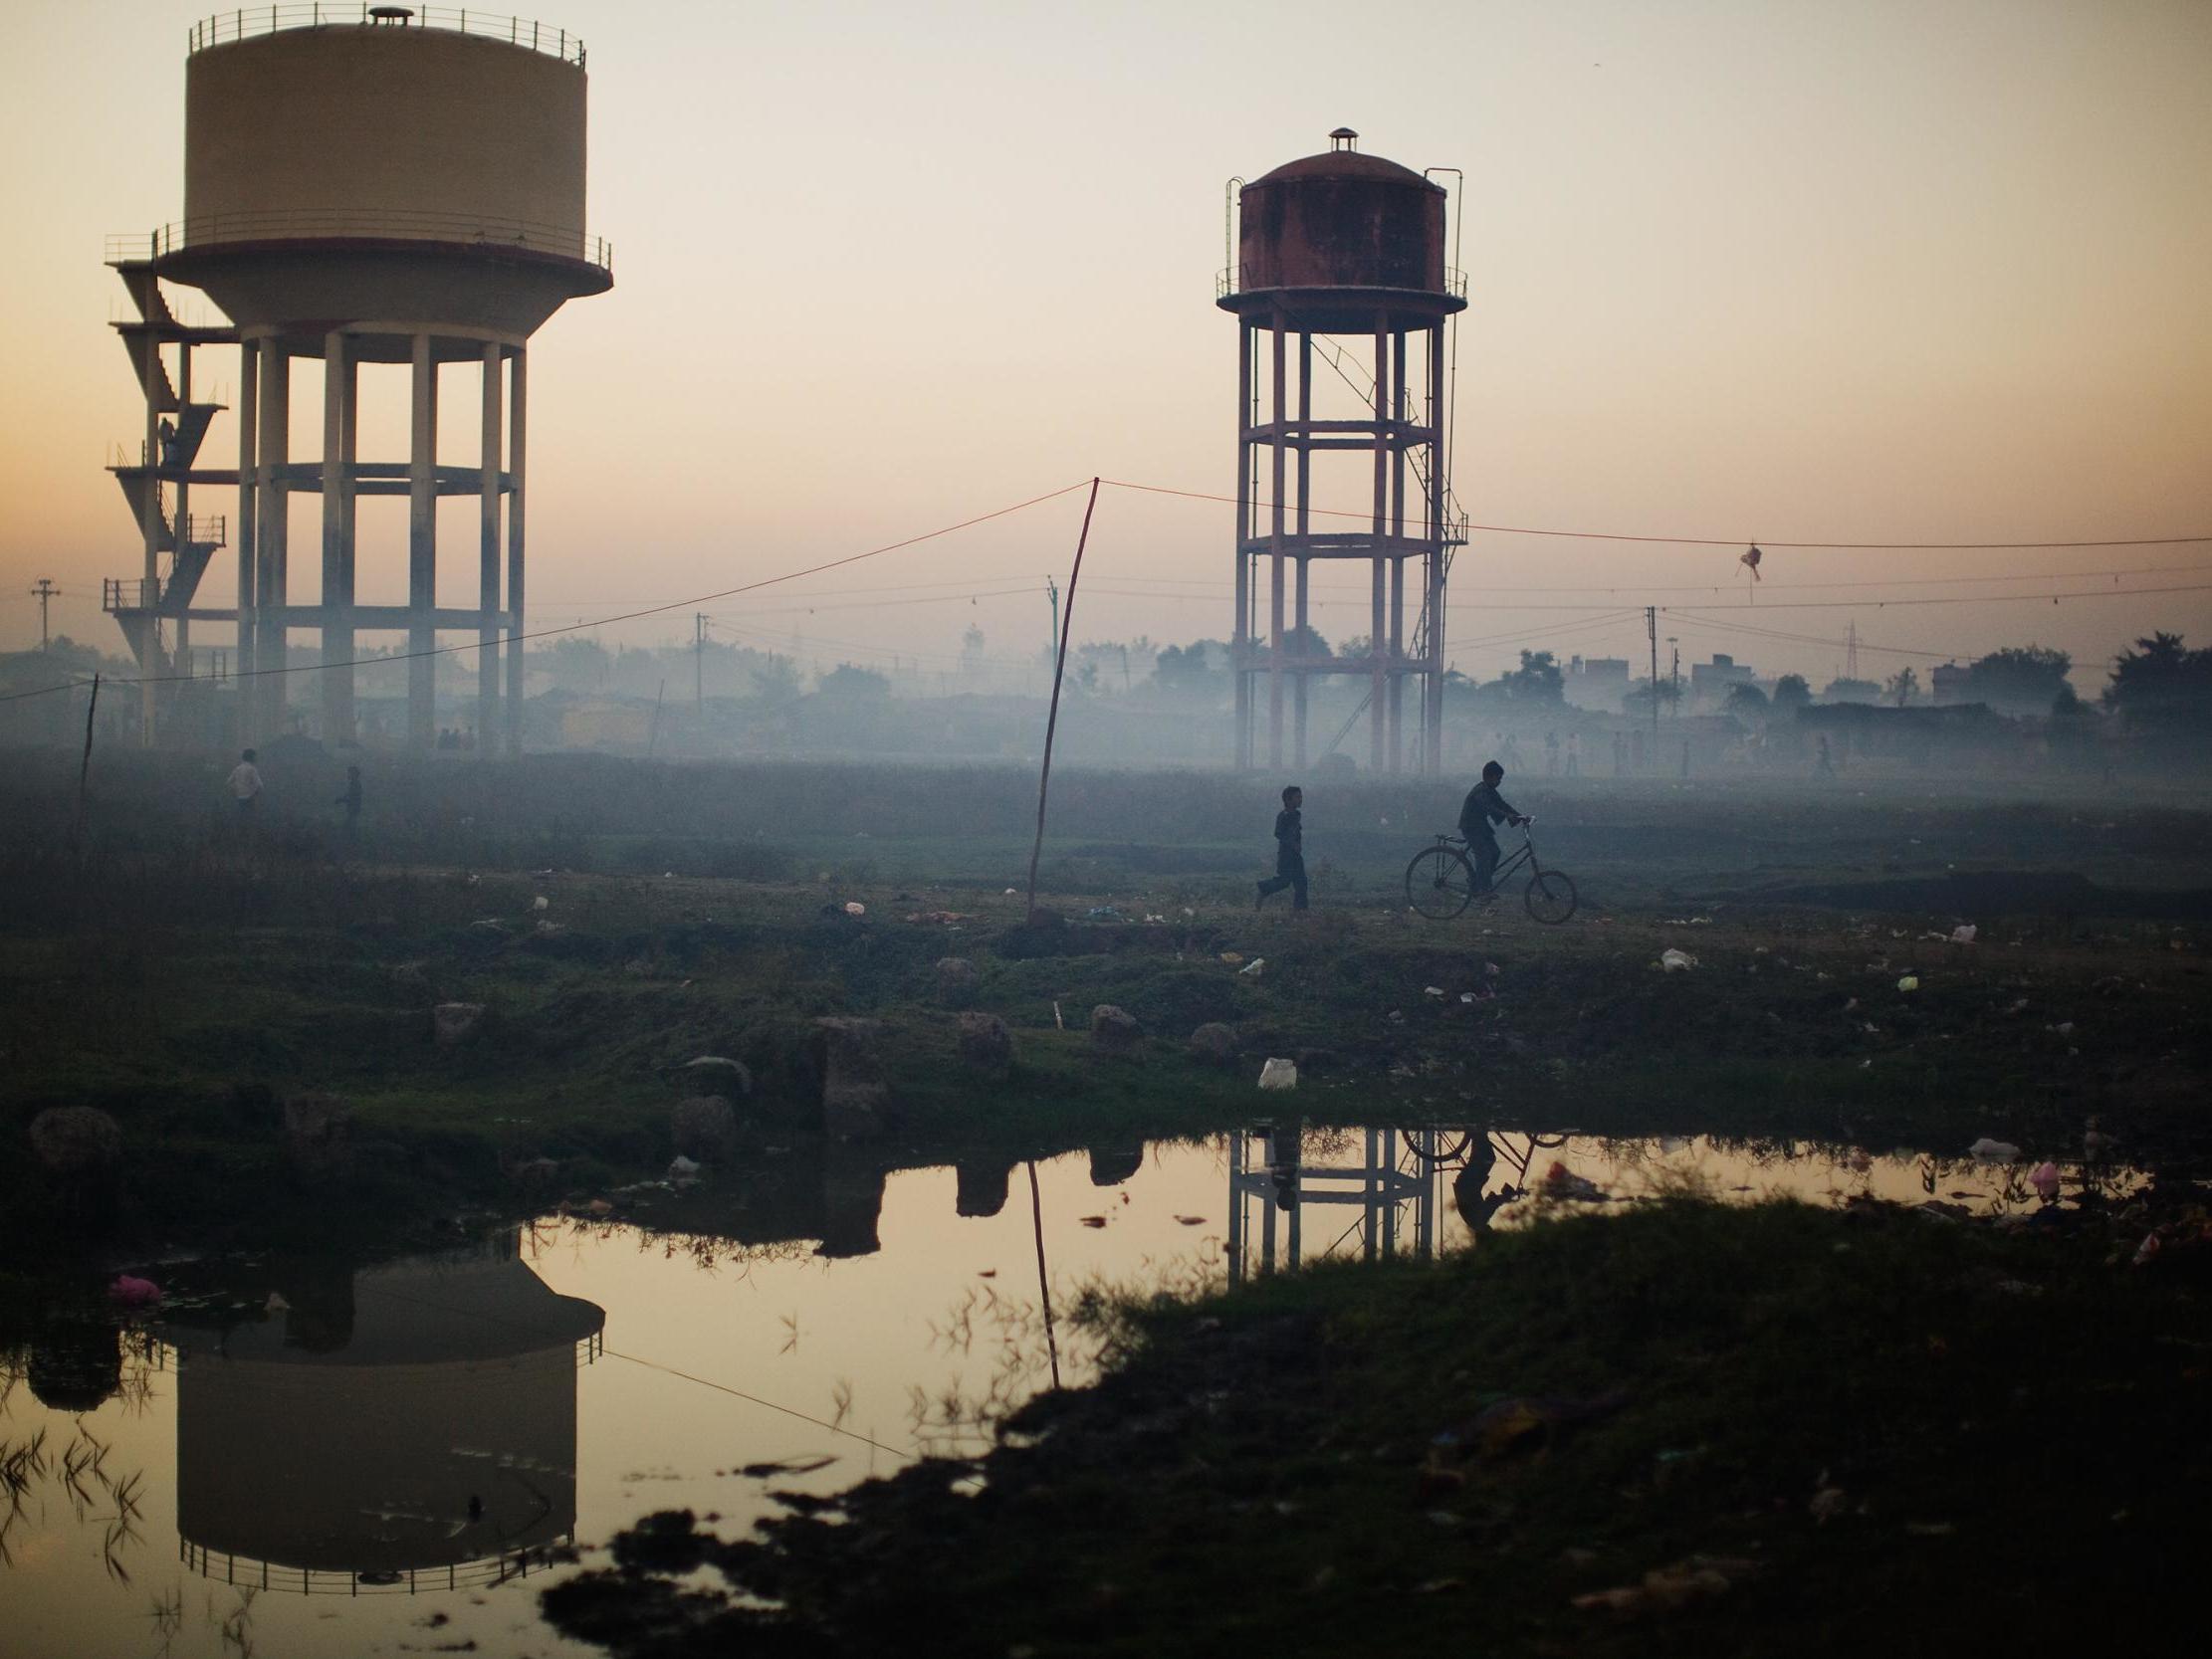 Tuncak understands that toxic contamination persists around the pesticide factory in Bhopal